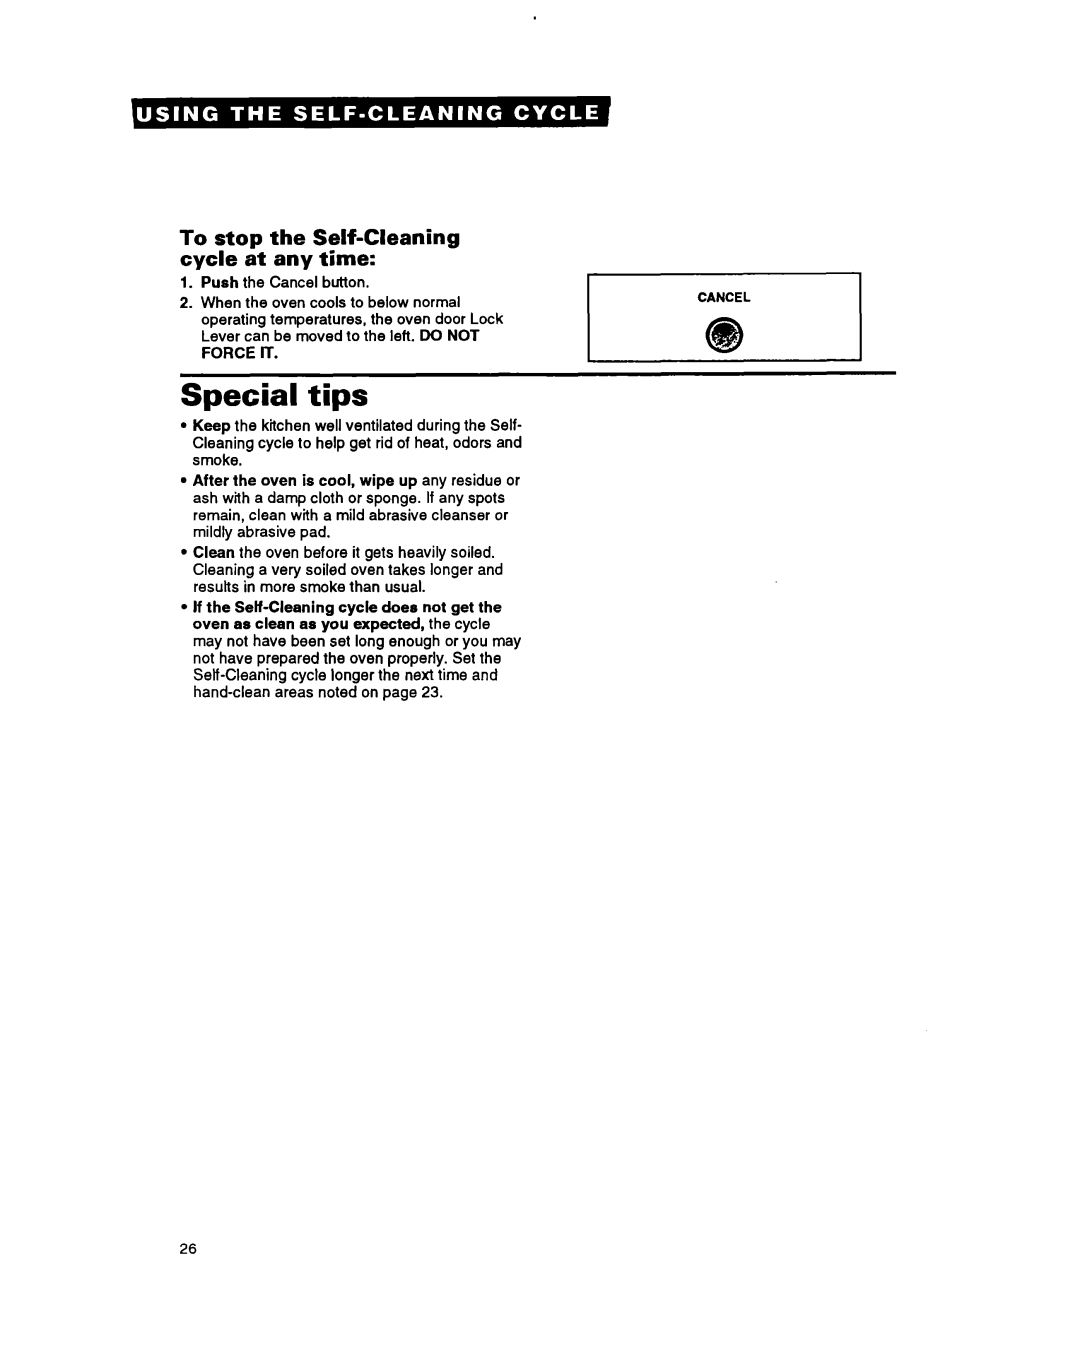 Whirlpool FGS395Y important safety instructions Special tips, To stop the Self-Cleaningcycle at any time 